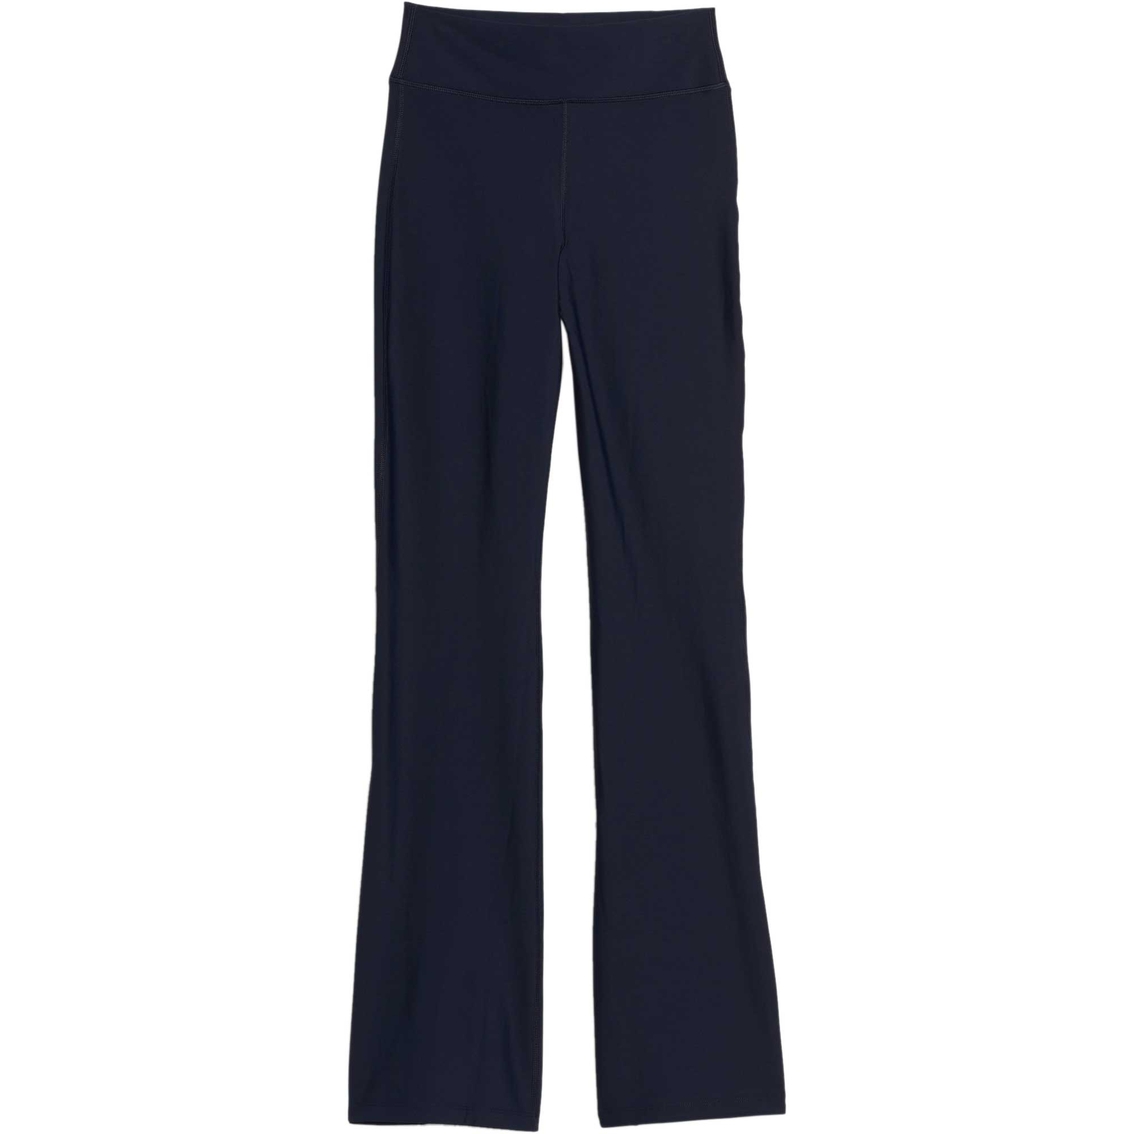 Old Navy Powersoft Extra High Rise Flare Pants | Pants & Capris ...